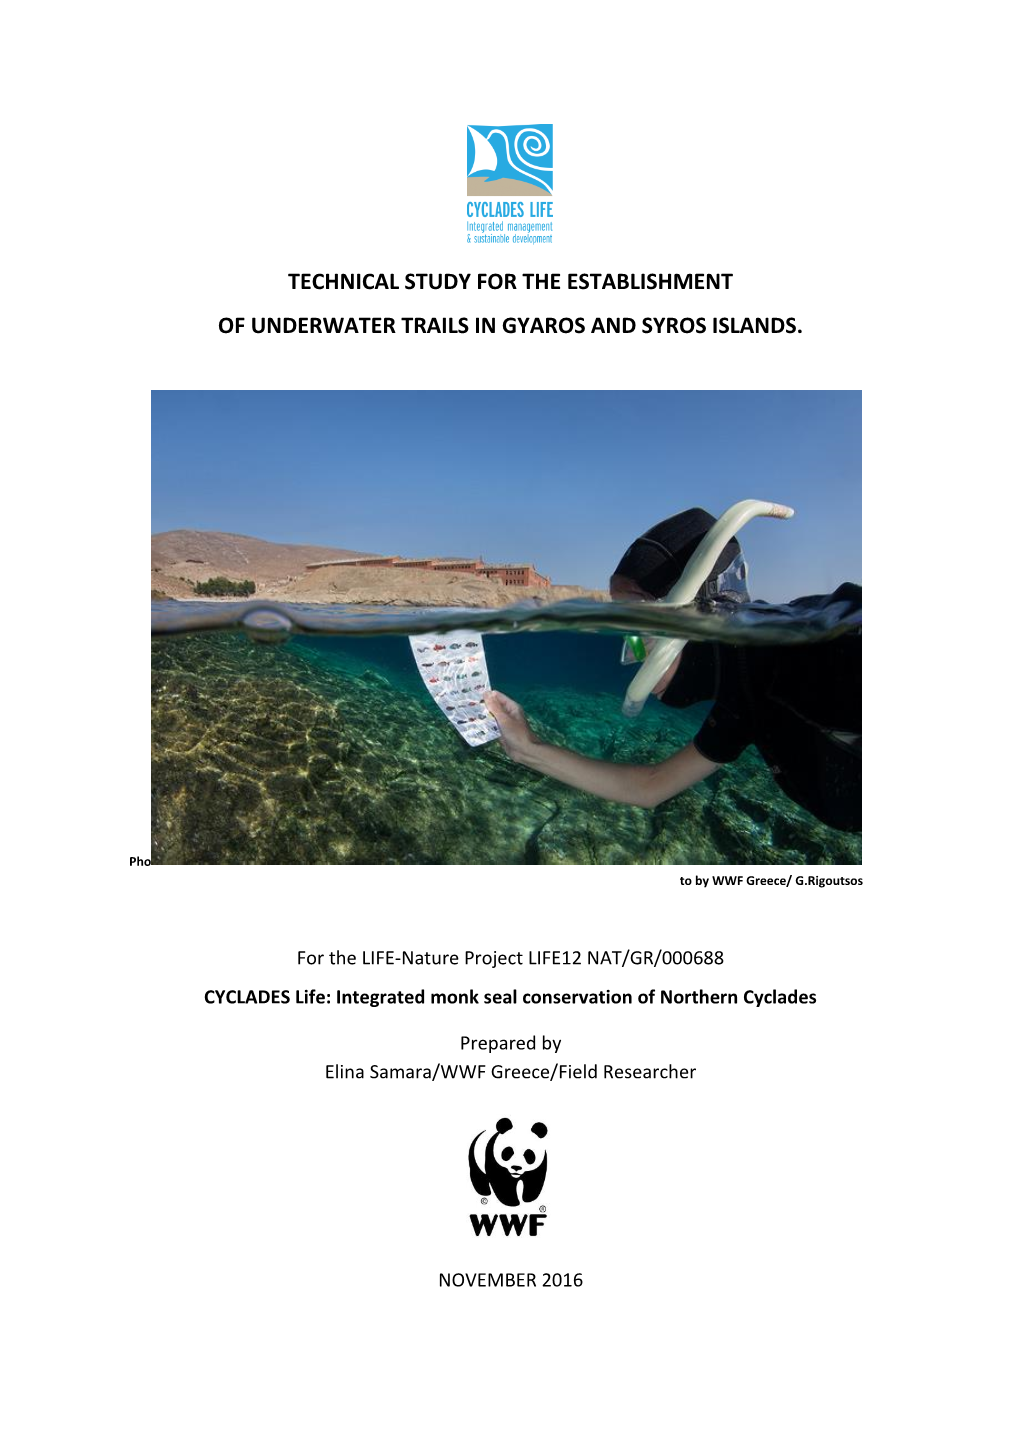 Technical Study for the Establishment of Underwater Trails in Gyaros and Syros Islands